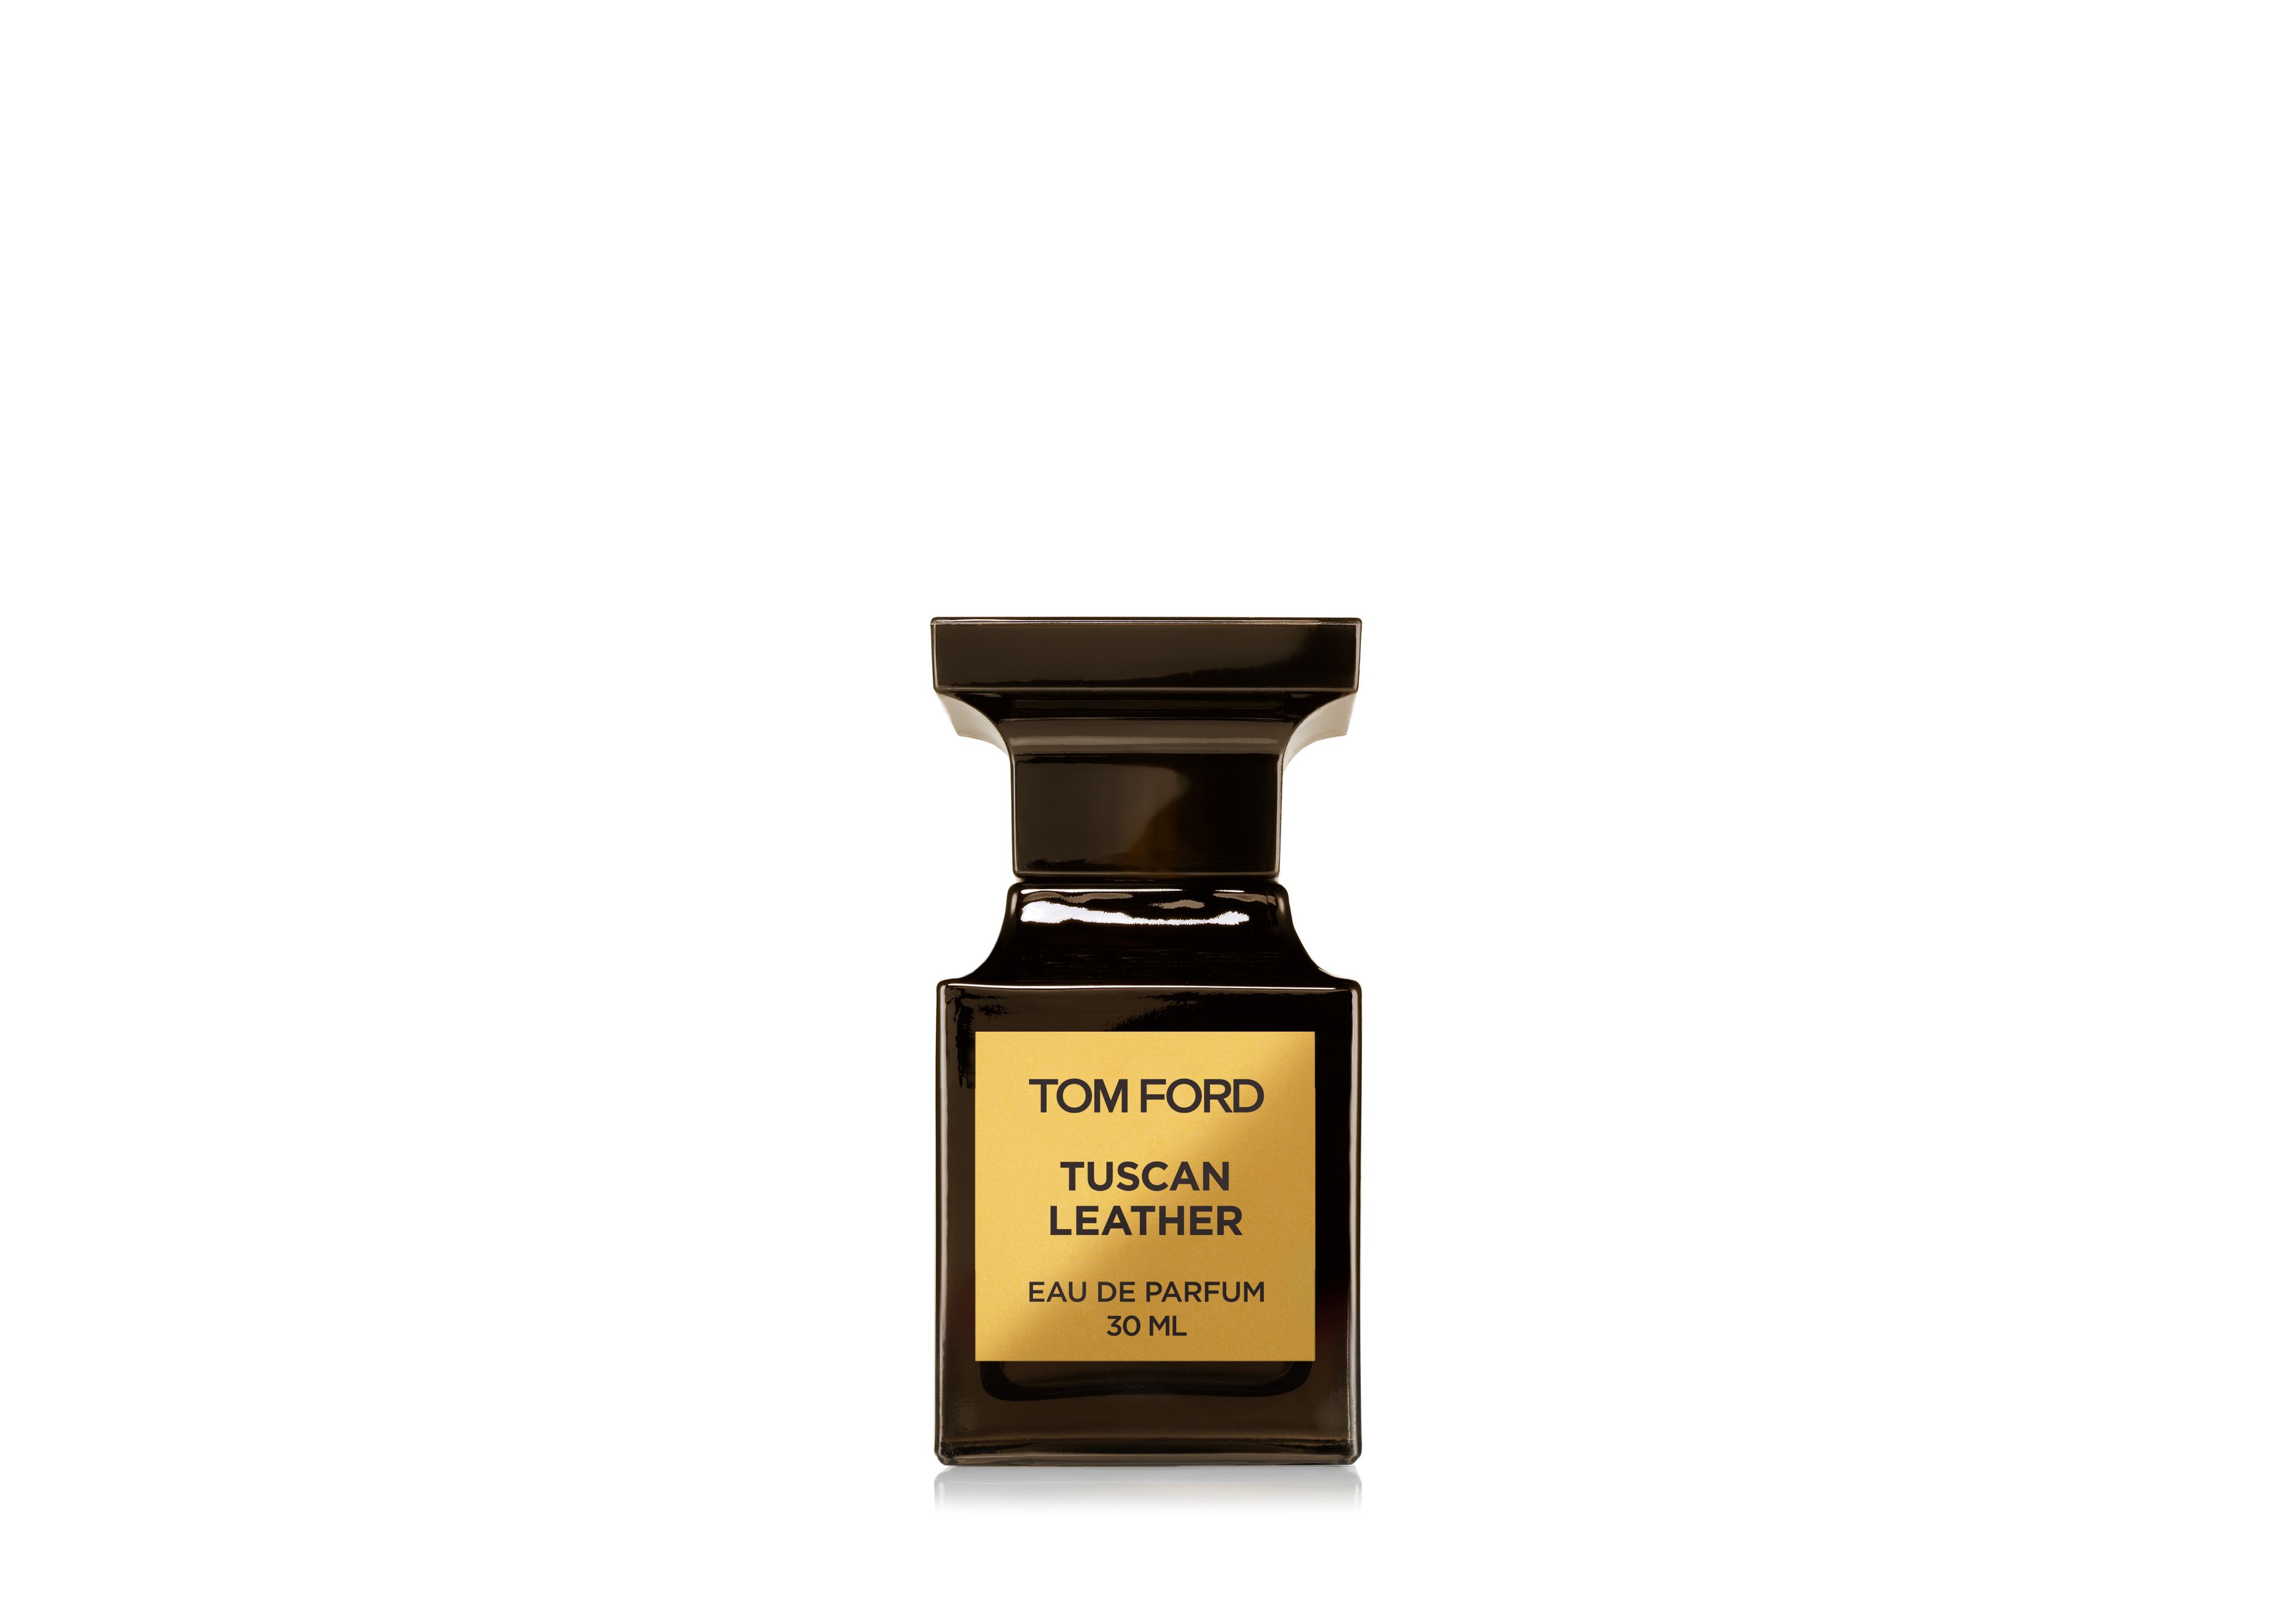 Tom Ford Tuscan Leather 1